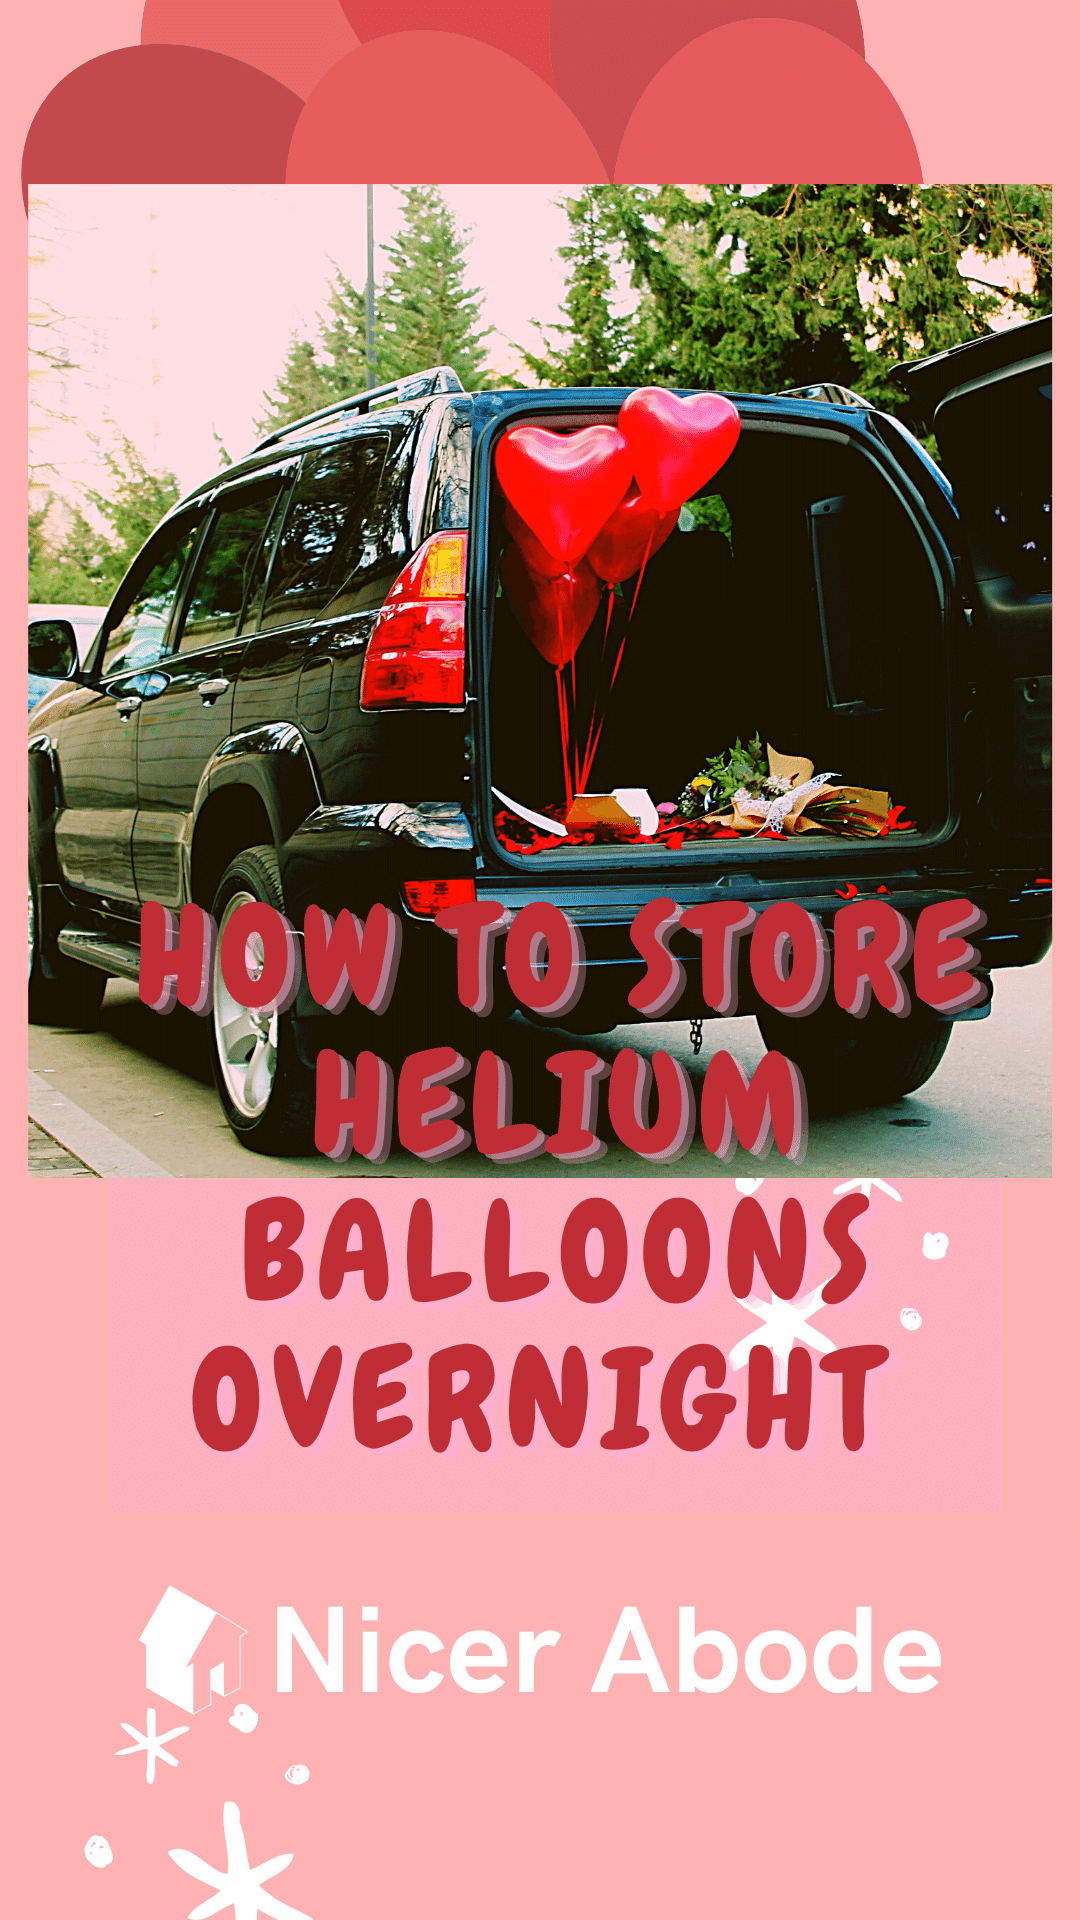 How-to-Store-Helium-Balloons-Overnight-